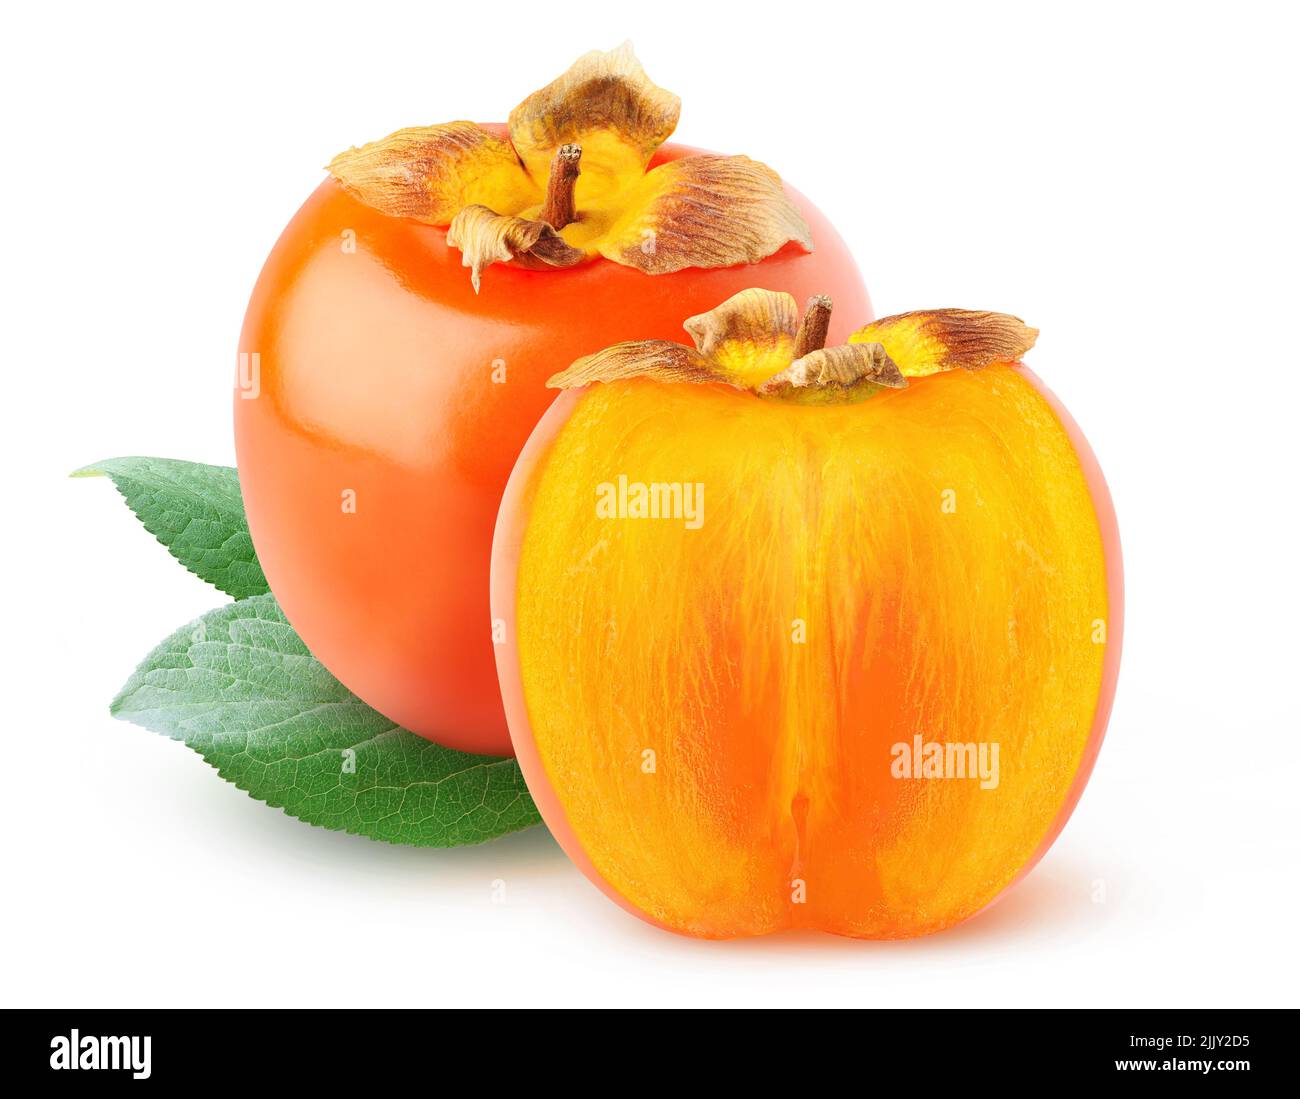 Isolated persimmons. Collection of whole and cut persimmon fruits isolated on white background Stock Photo